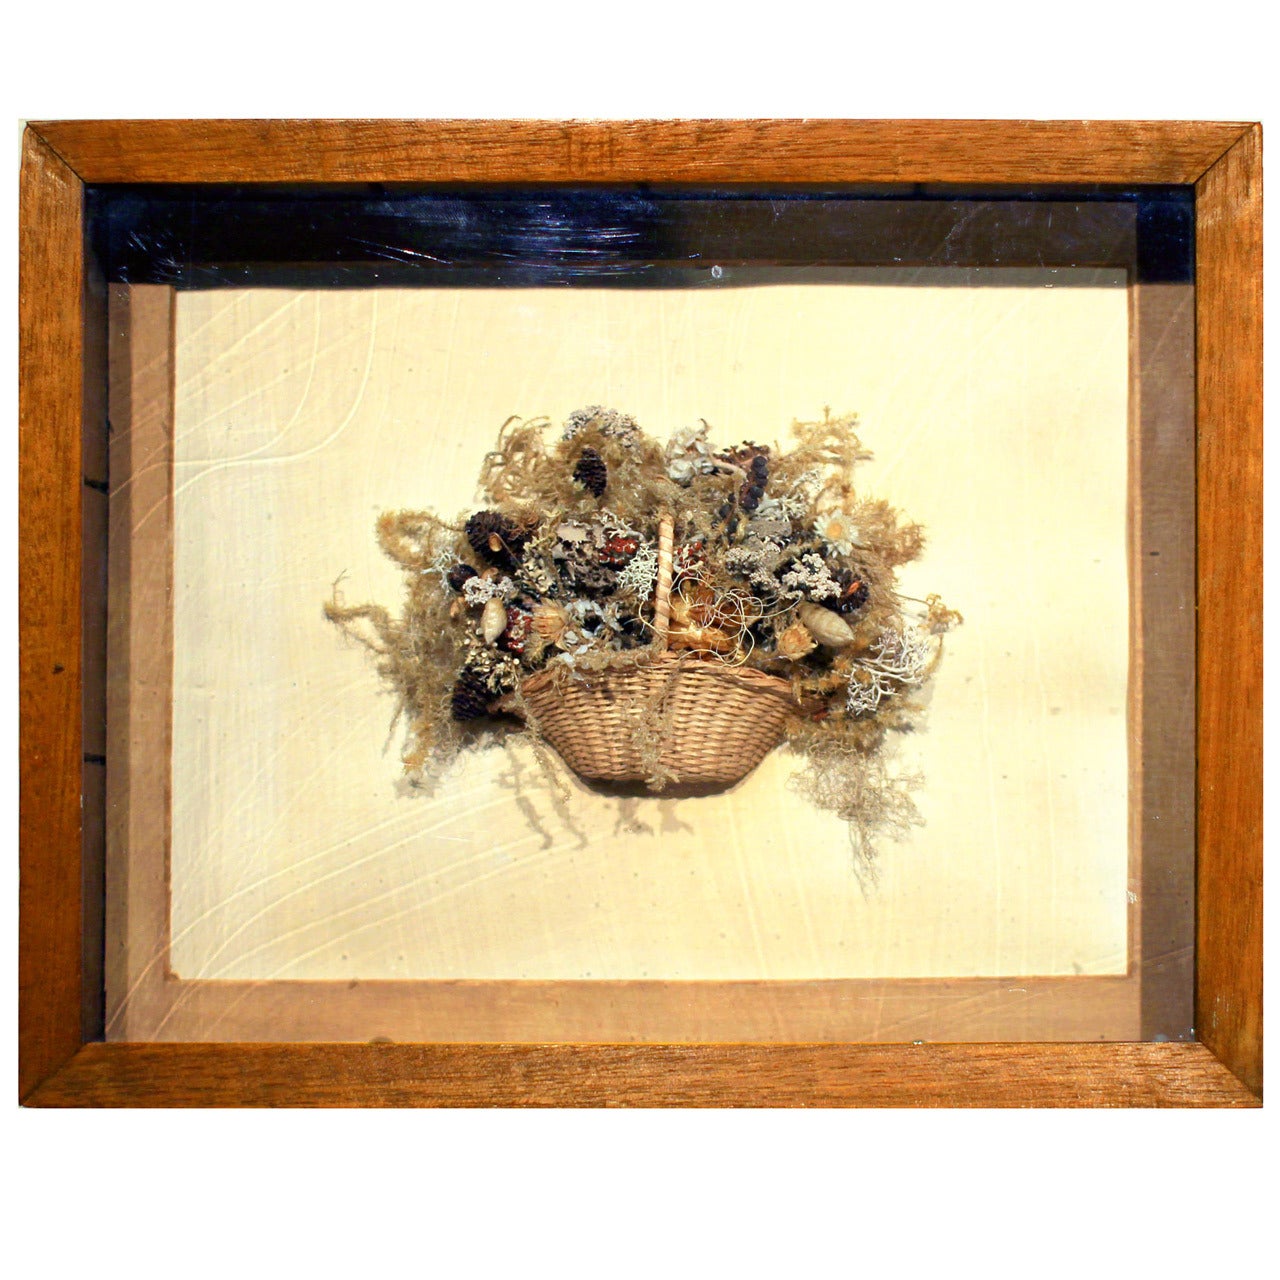 Shadowbox of a Basket of Dried Flowers